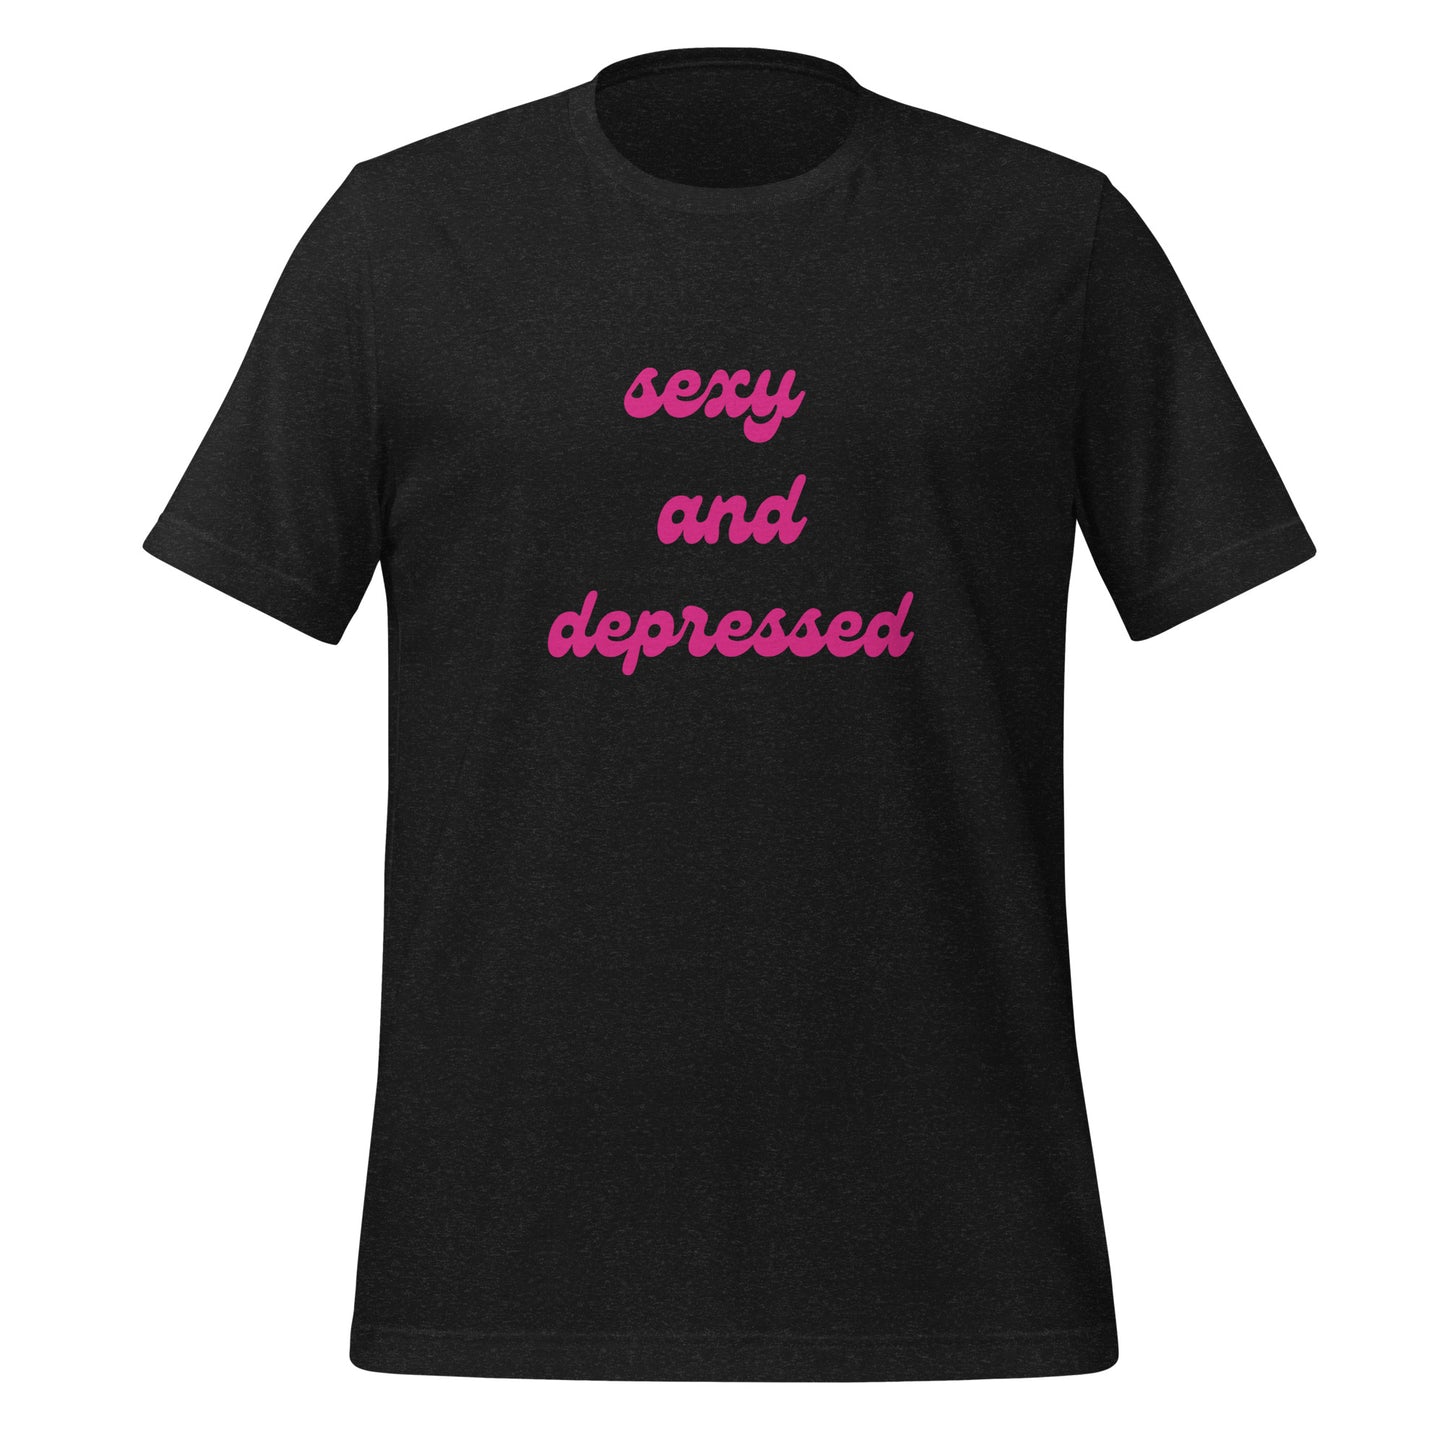 Sexy and Depressed